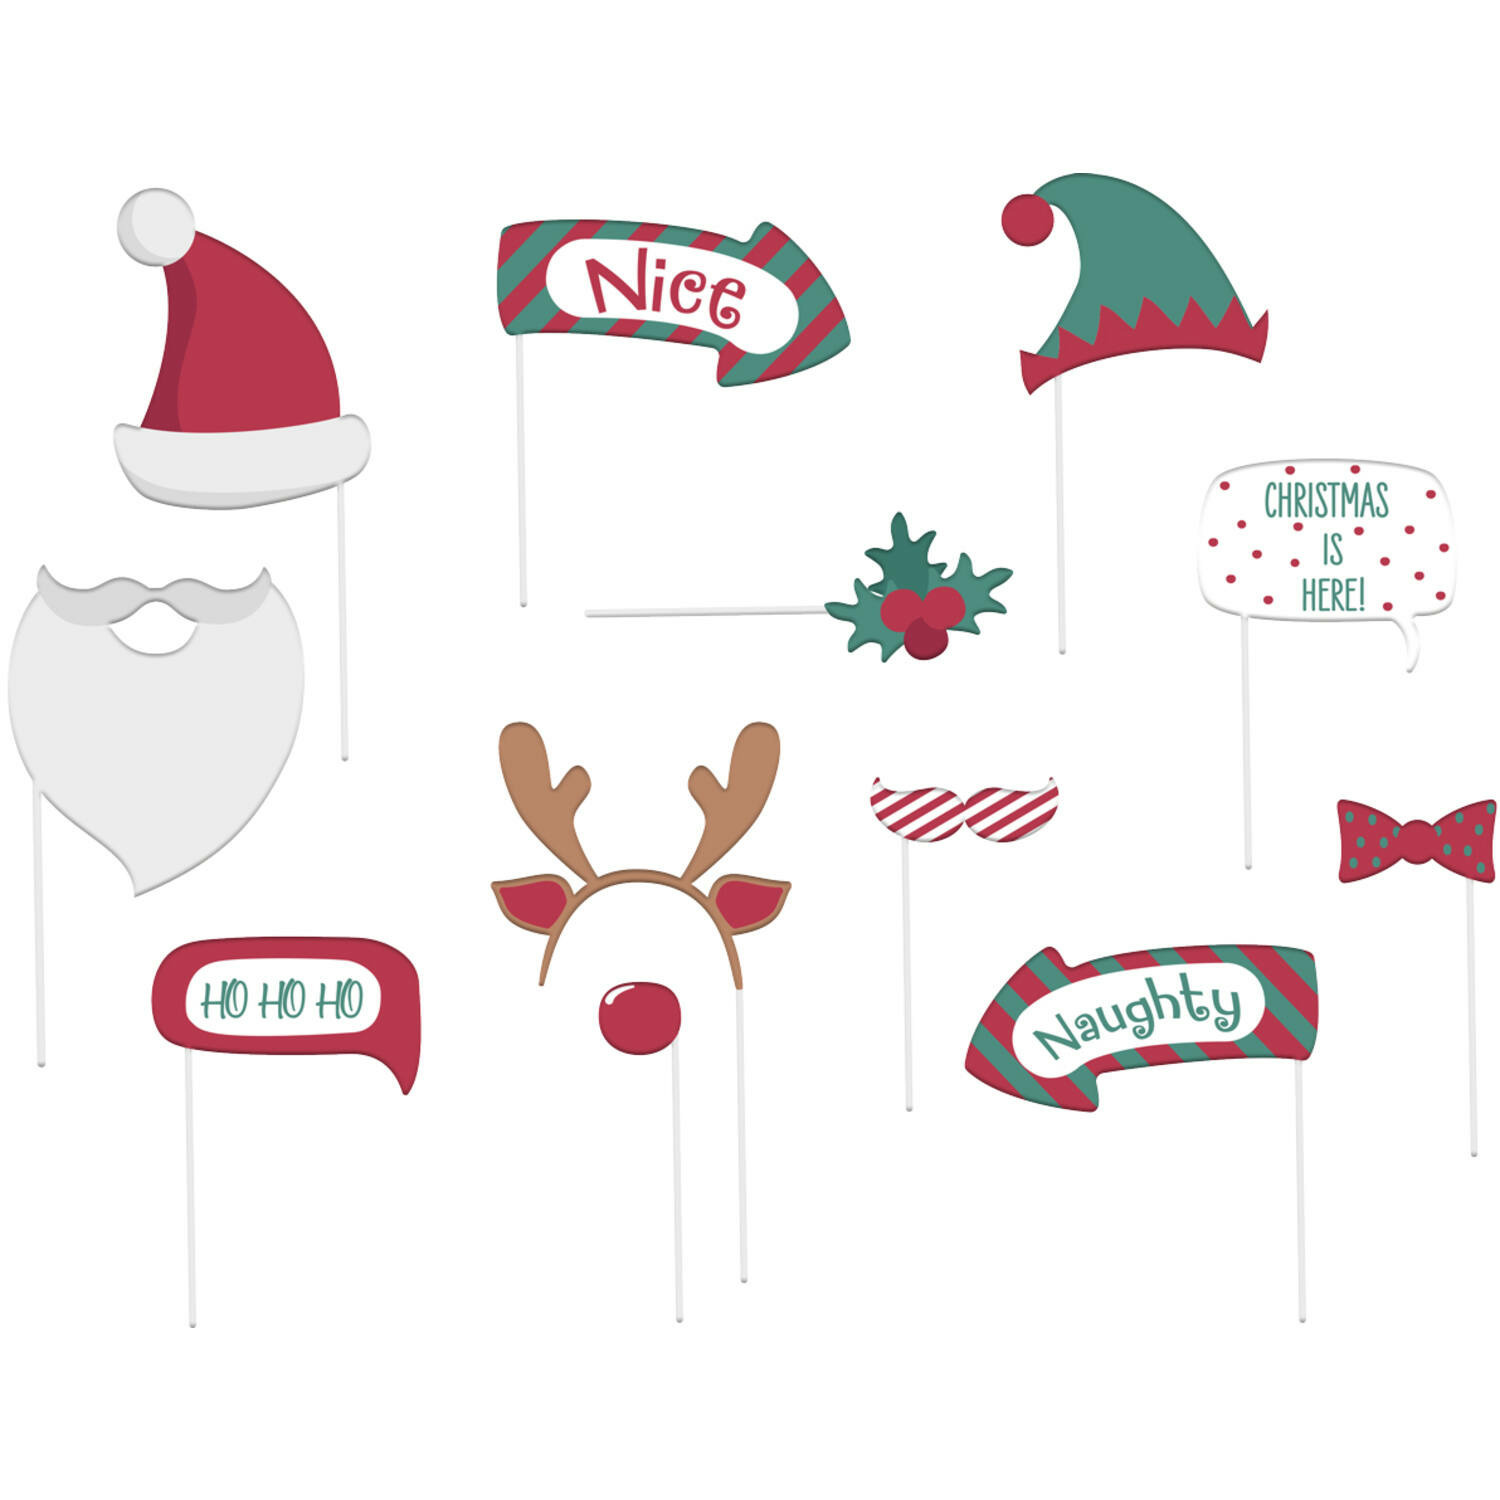 Kerst foto prop set - 24-delig - Christmas party - photo booth -